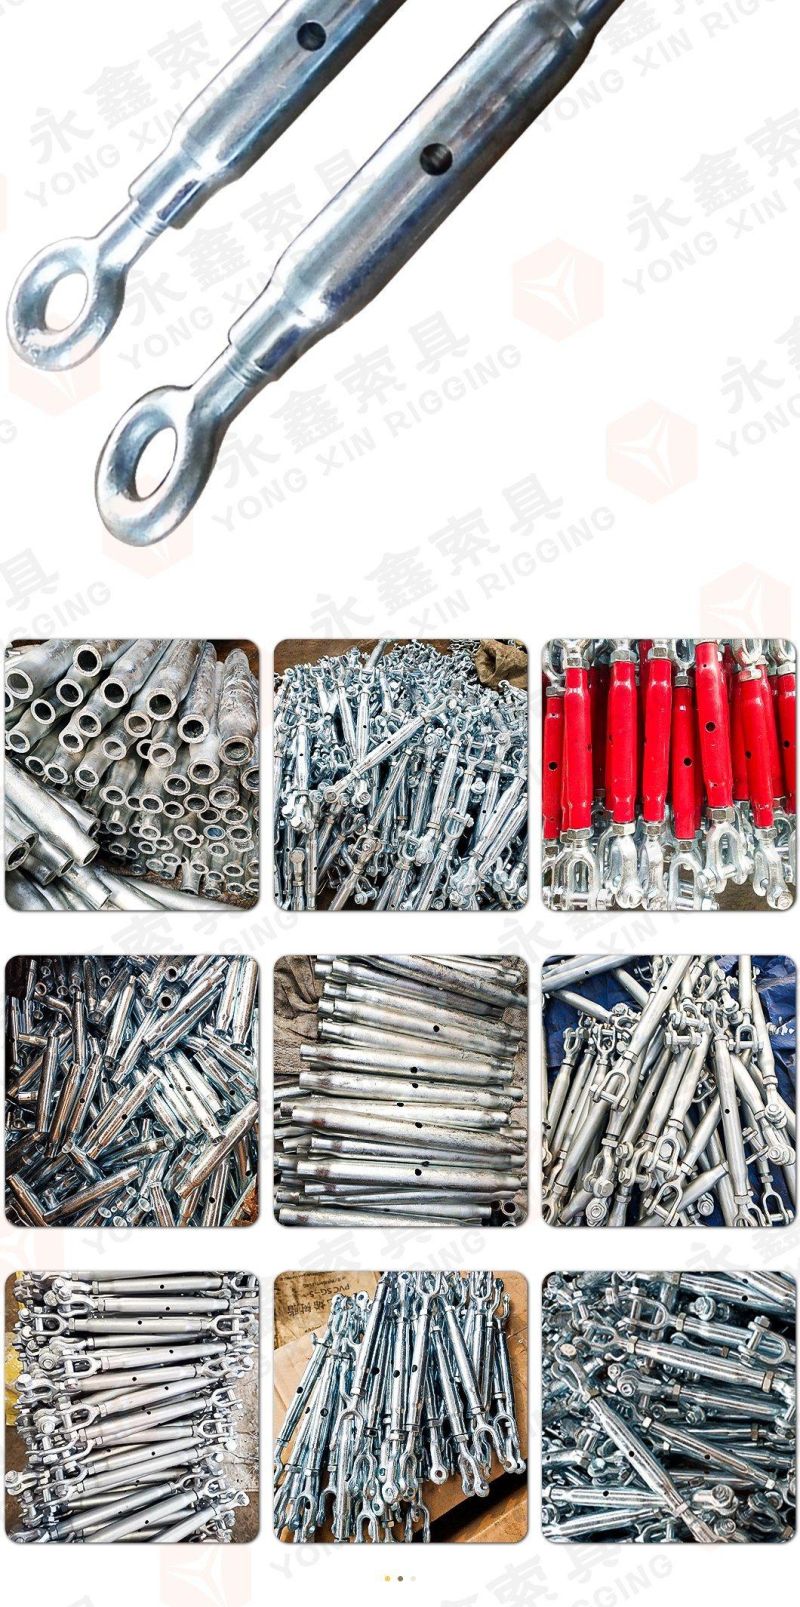 DIN1478 Wire Rope Turnbuckle Electric Galvanized Cable Turnbuckle with Eye and Eye Closed Body Pipe Tucrnbuckle